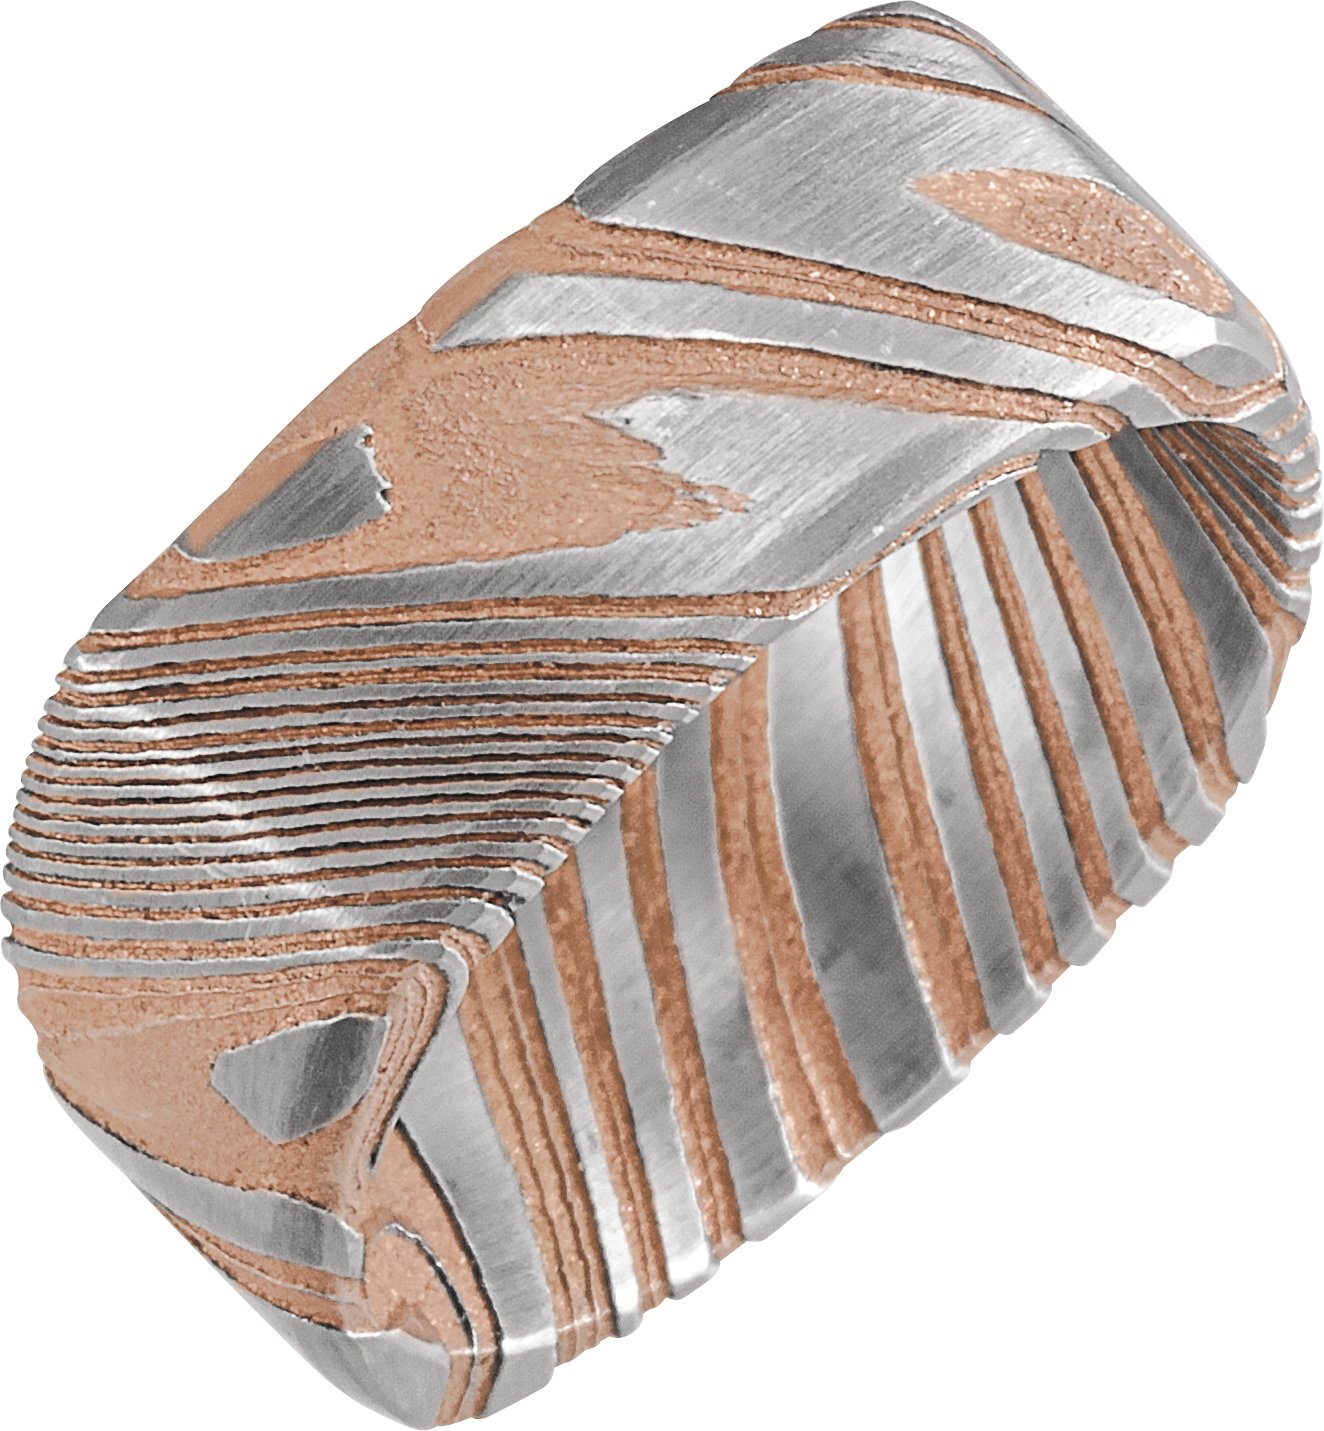 Damascus Steel 8 mm Patterned Square Band Size 8 Ref 16144233